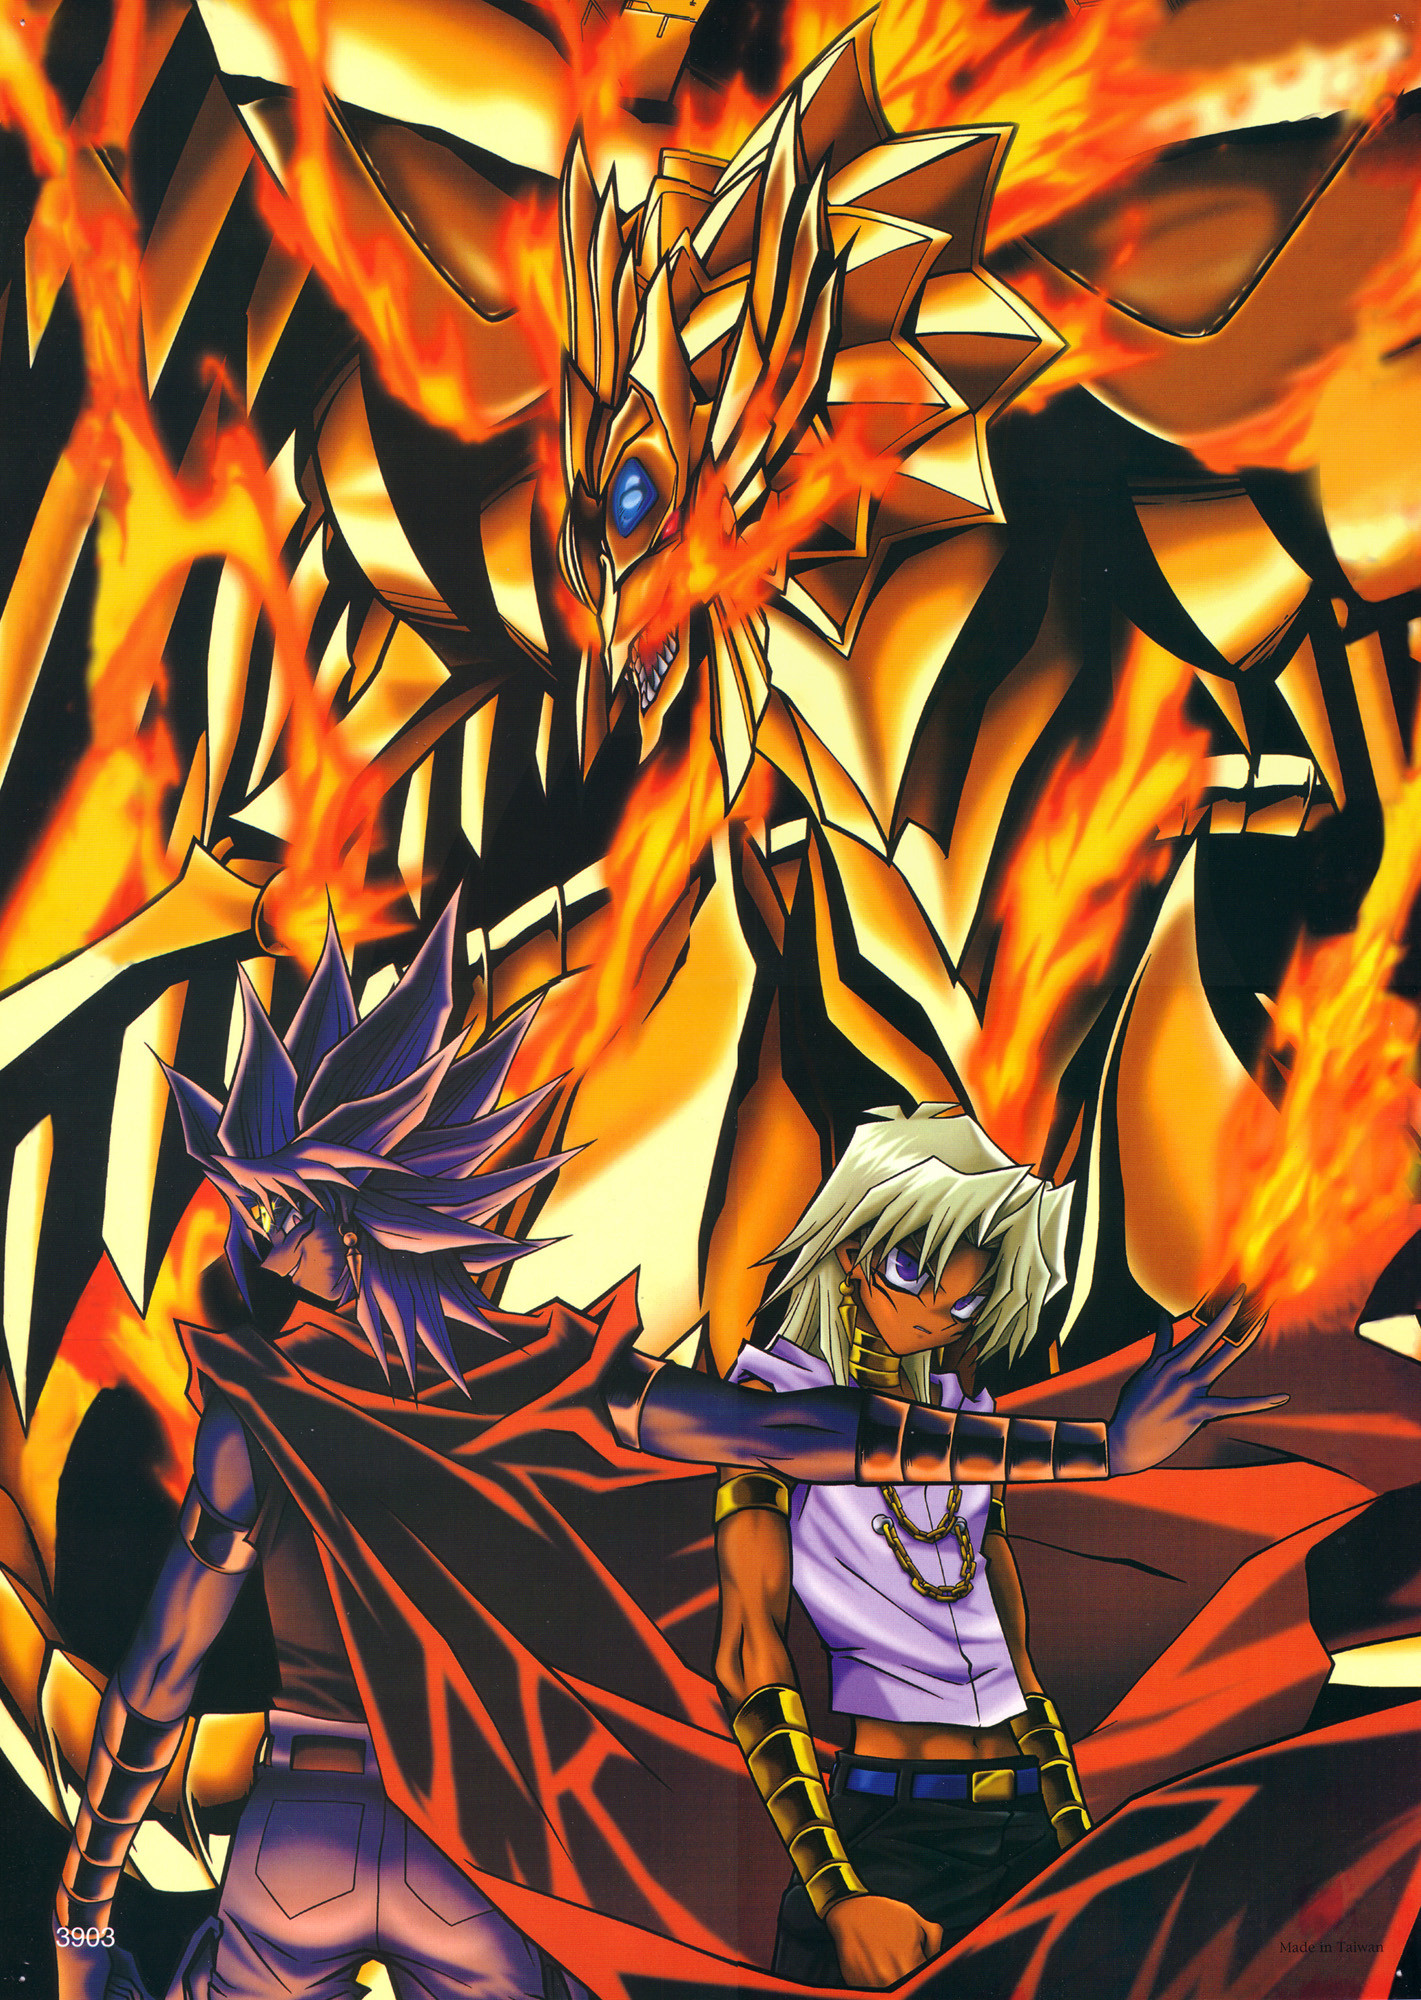 Well theres not many Yu Gi Oh This is one of the few Yu Gi Oh The Duel Monster in the background is The Winged Dragon of Ra. The characters are Yami Malik